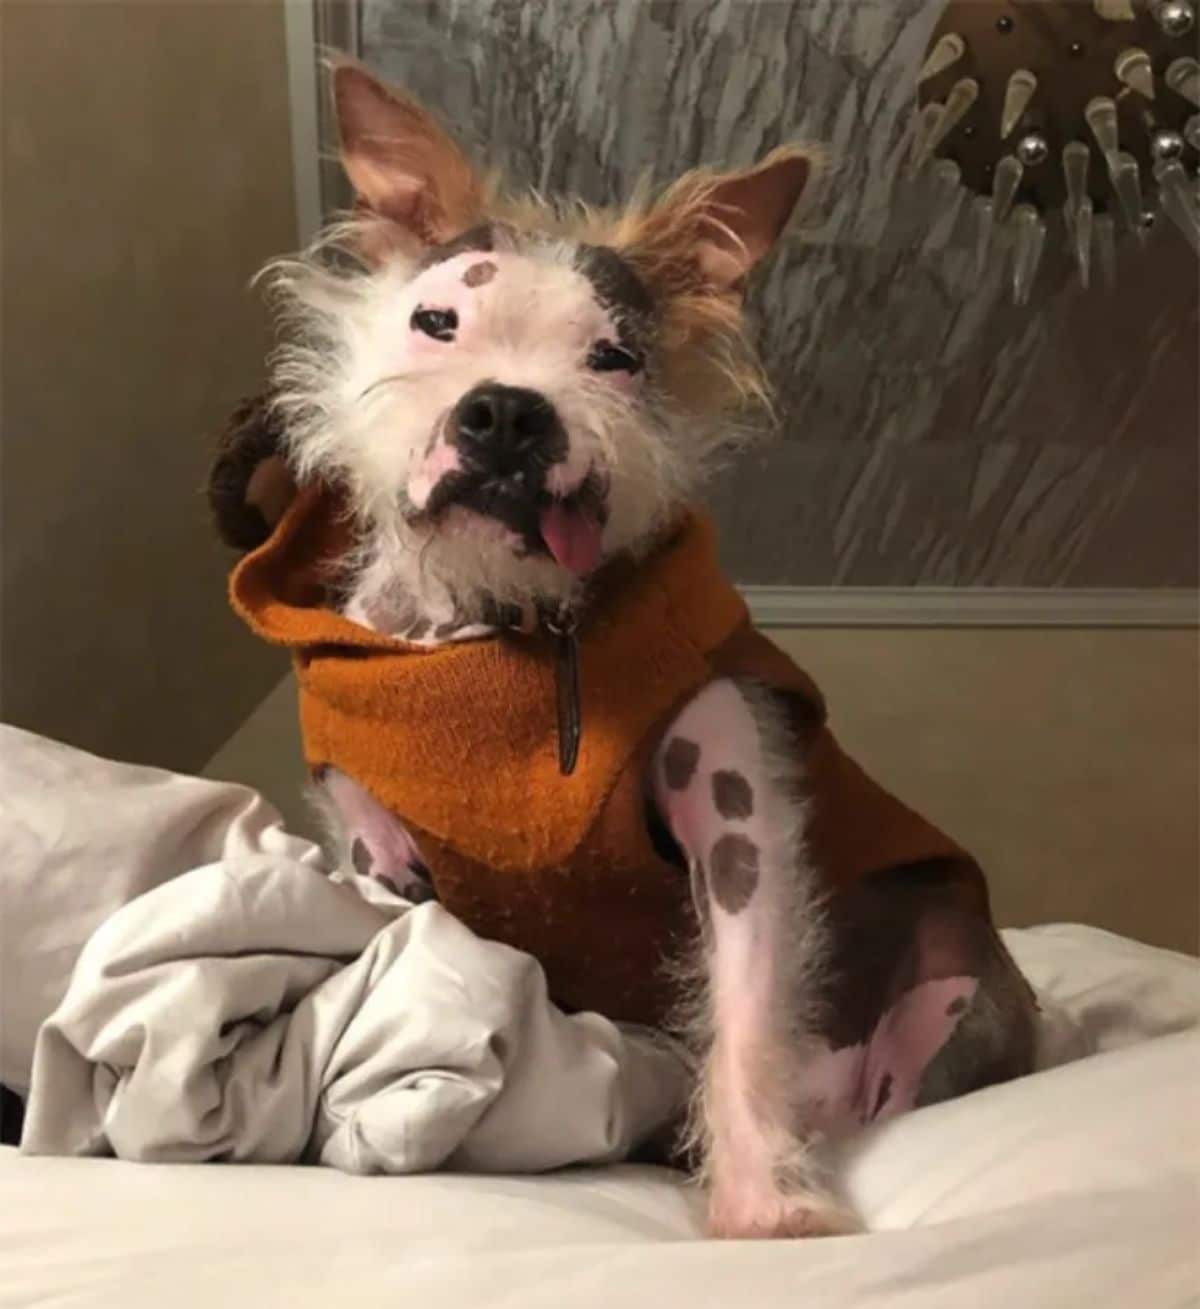 half fluffy and mostly hairless black and white dog in an orange sweater sitting on a white bed